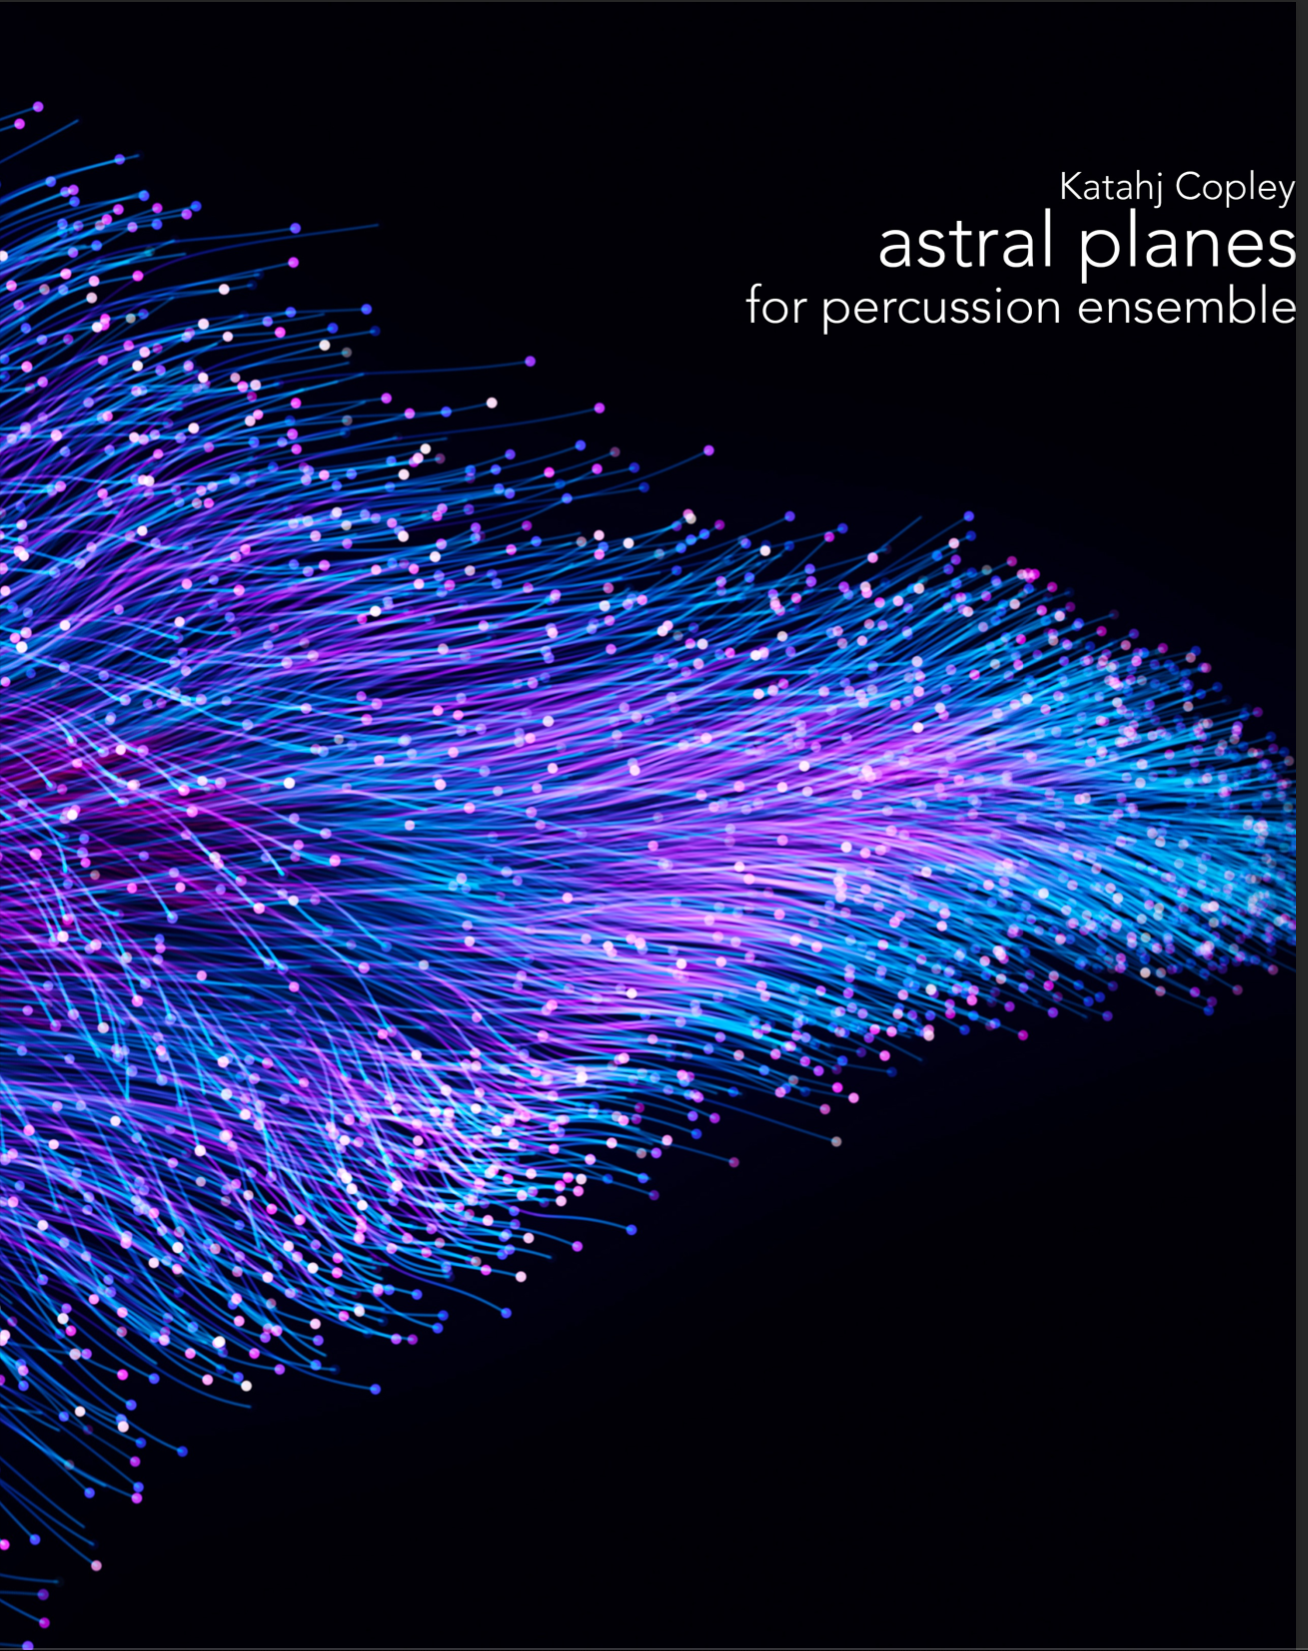 Astral Planes by Katahj Copley